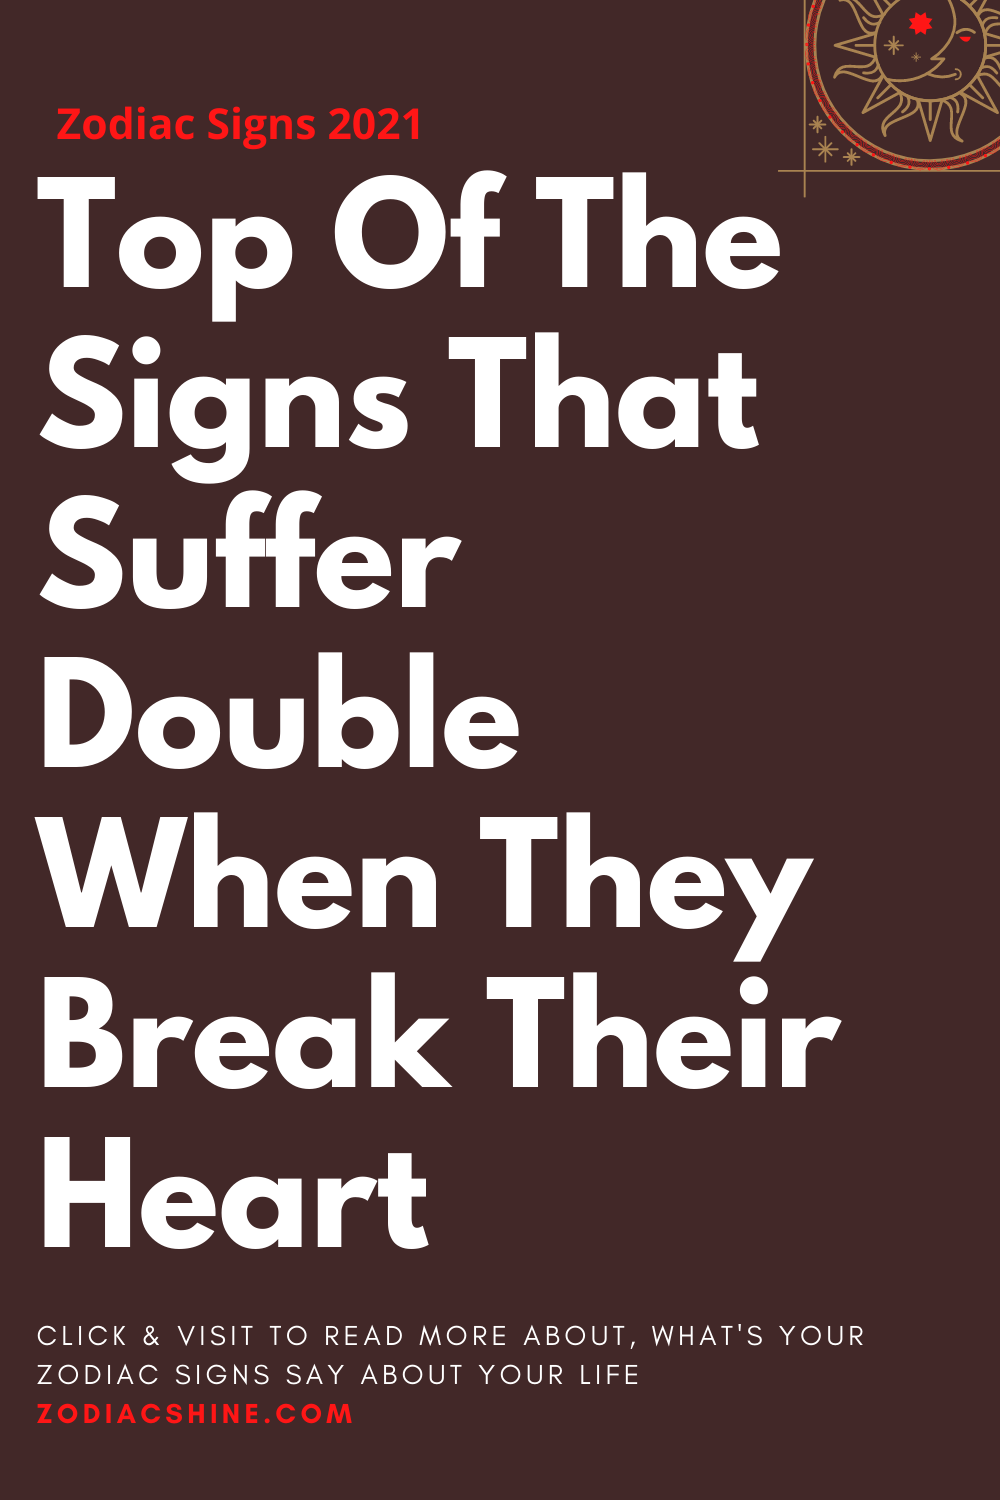 Top Of The Signs That Suffer Double When They Break Their Heart